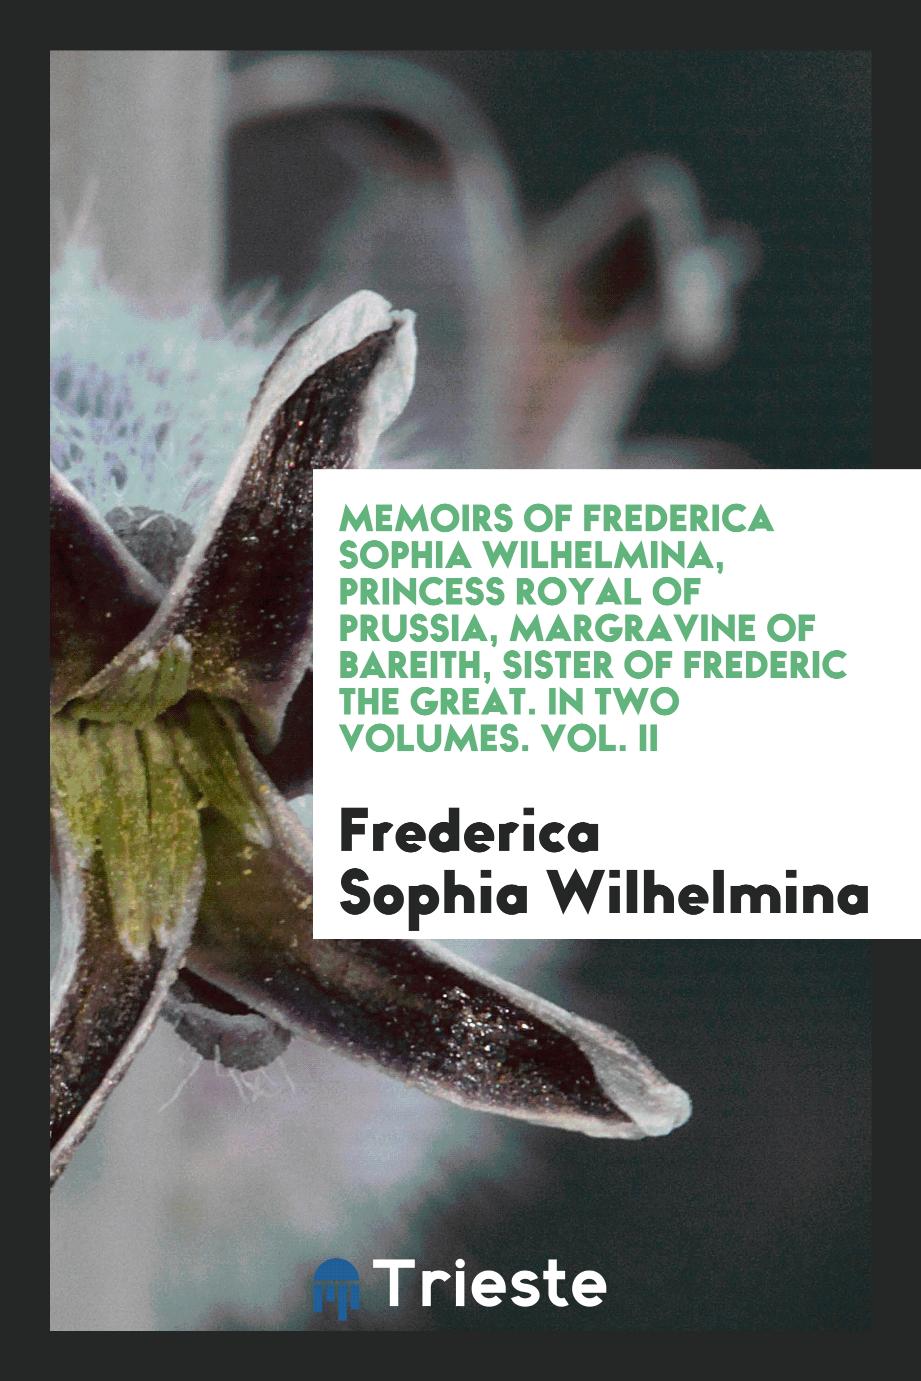 Memoirs of Frederica Sophia Wilhelmina, Princess Royal of Prussia, Margravine of Bareith, Sister of Frederic the Great. In Two Volumes. Vol. II